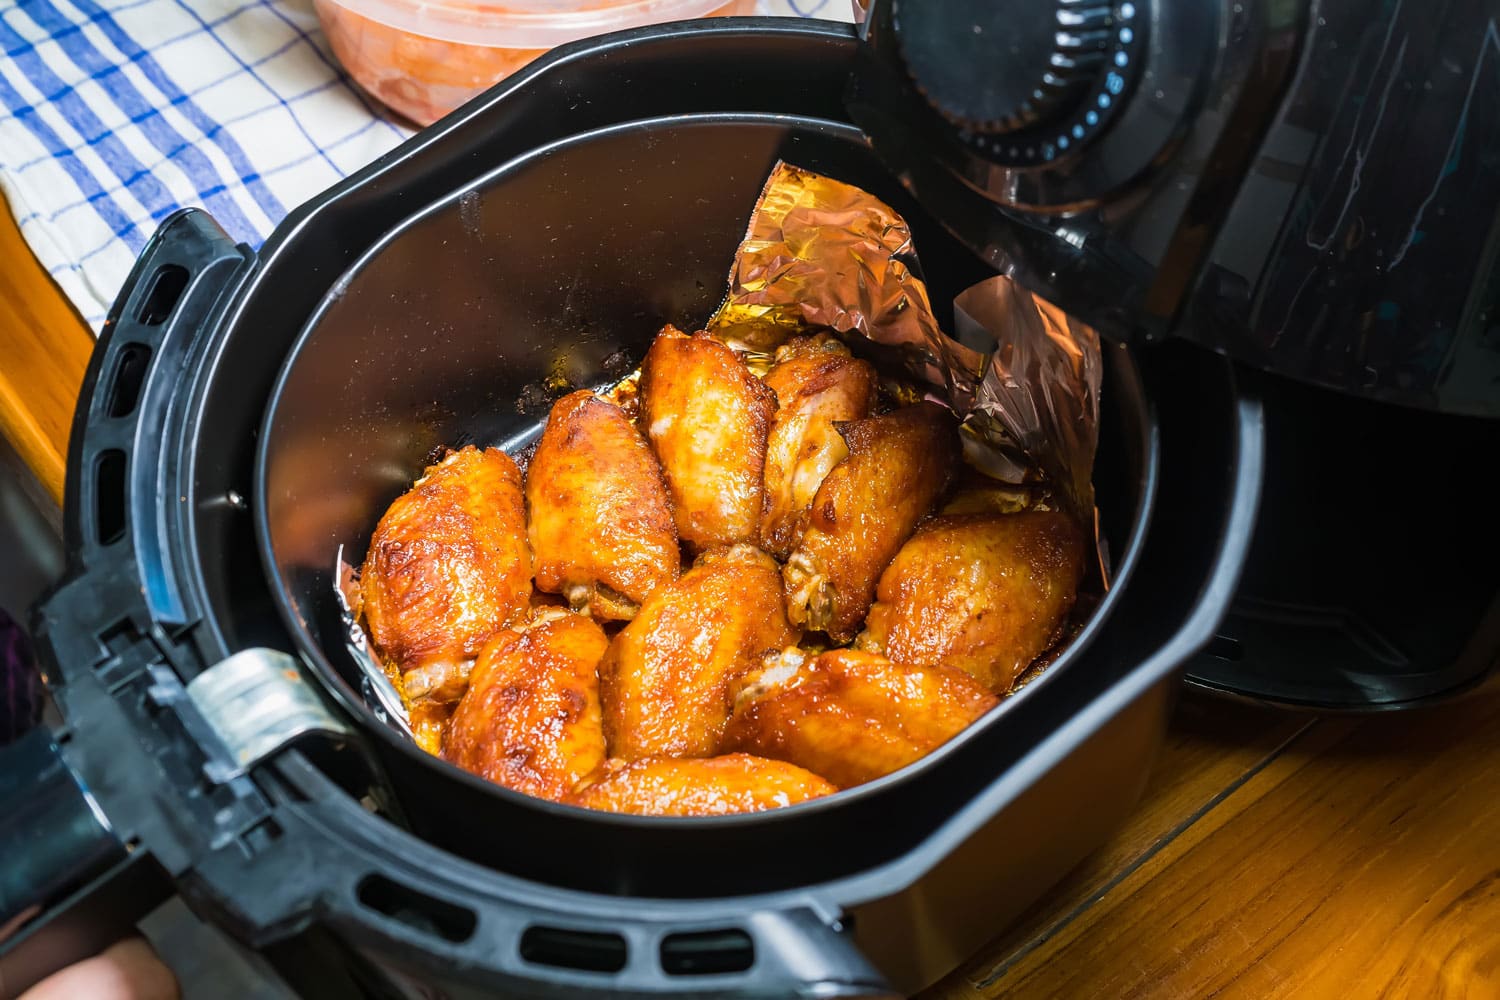 Frying BBQ chicken wings in a hot air fryer